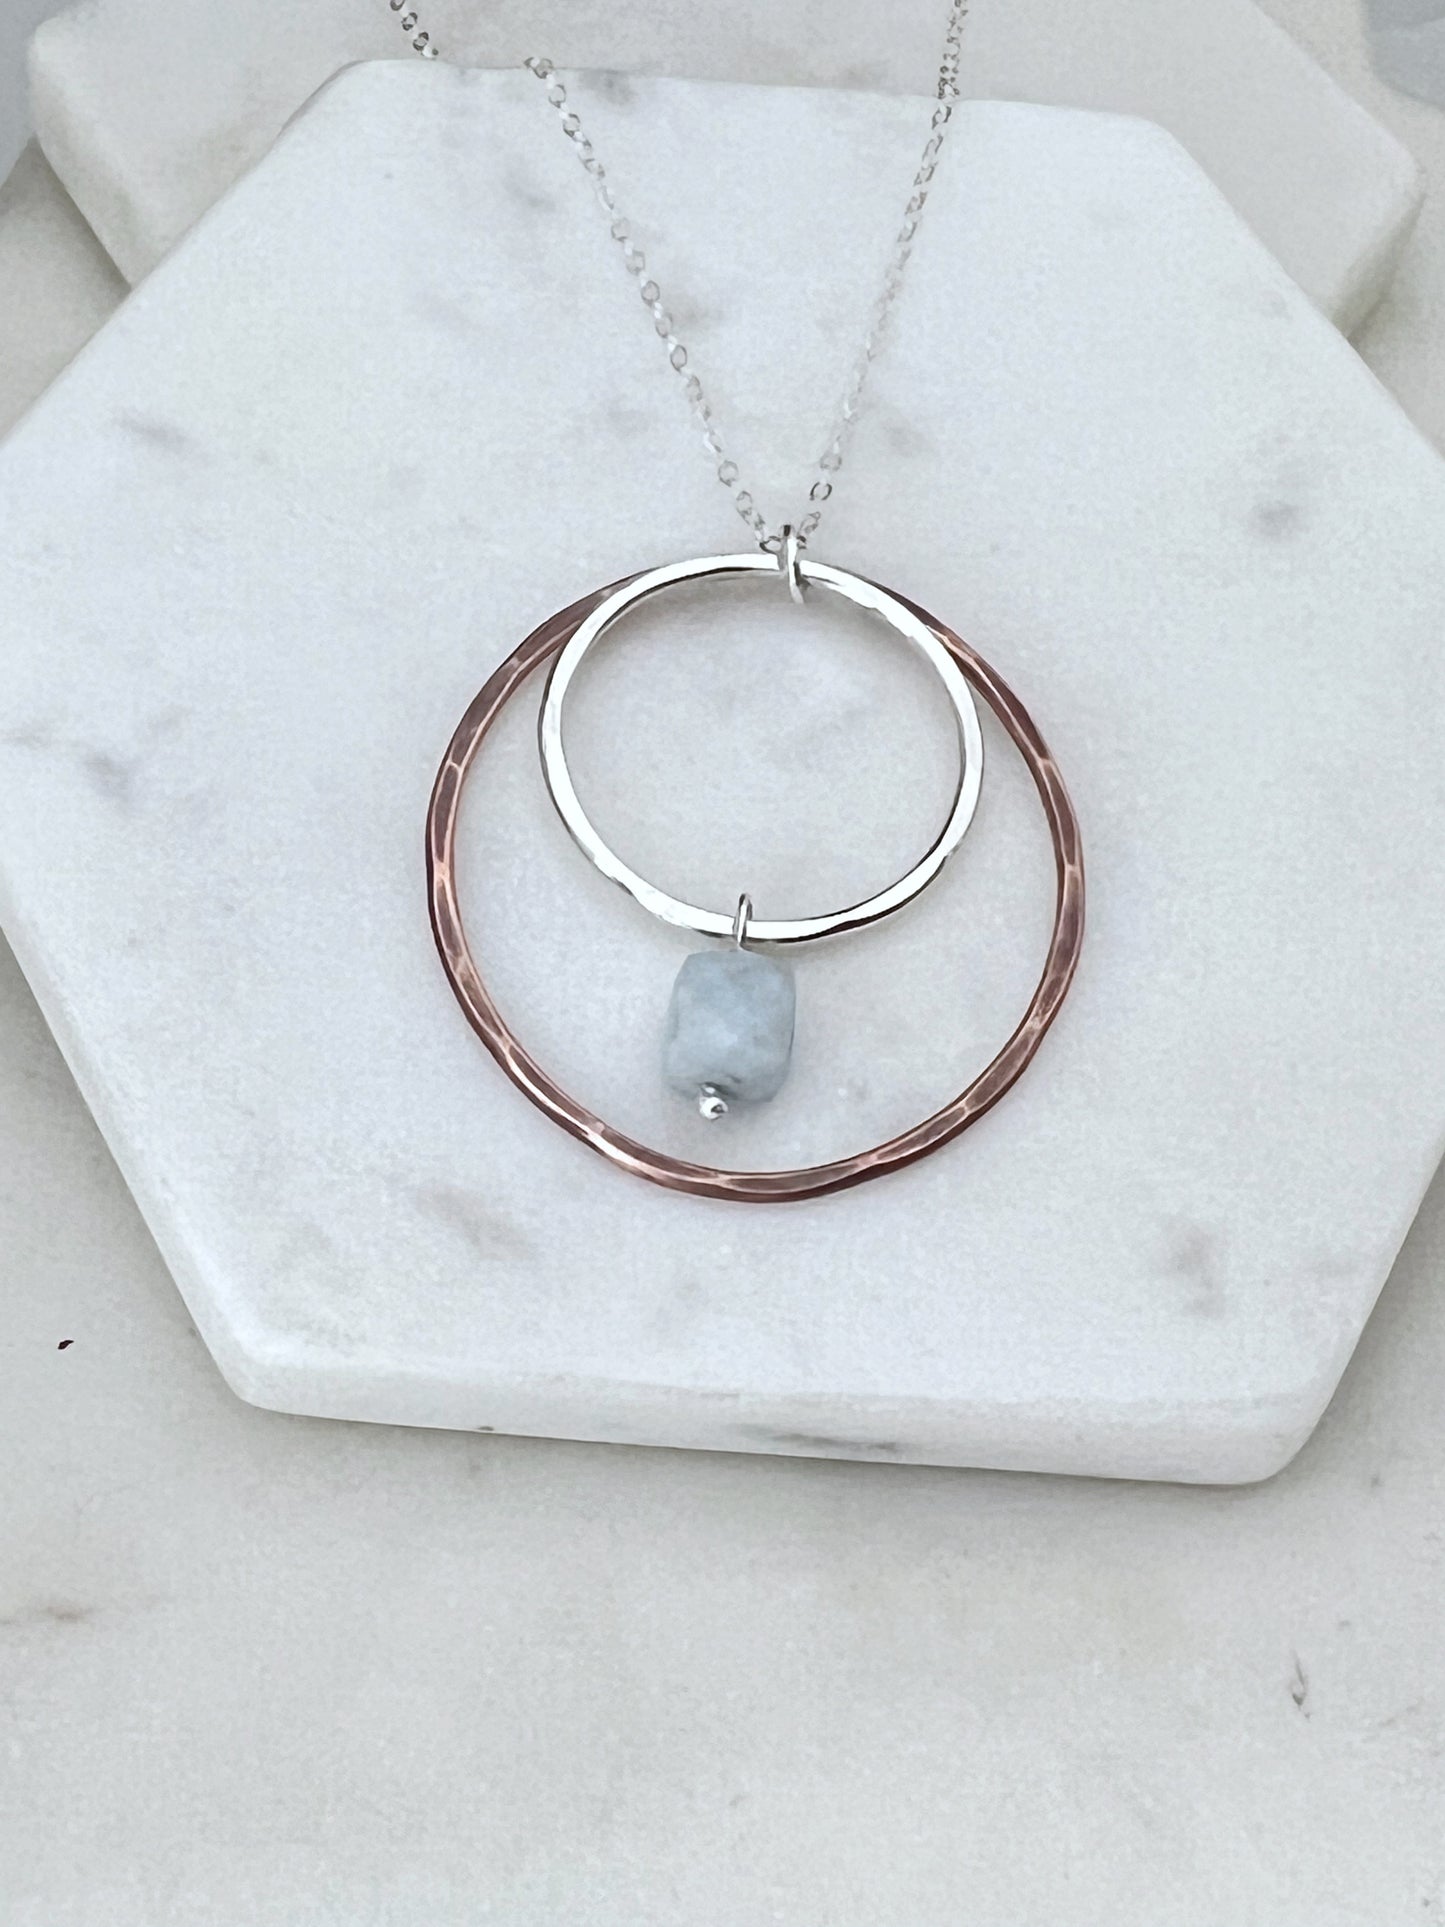 Sterling silver and copper forged hoop necklace with blue opal